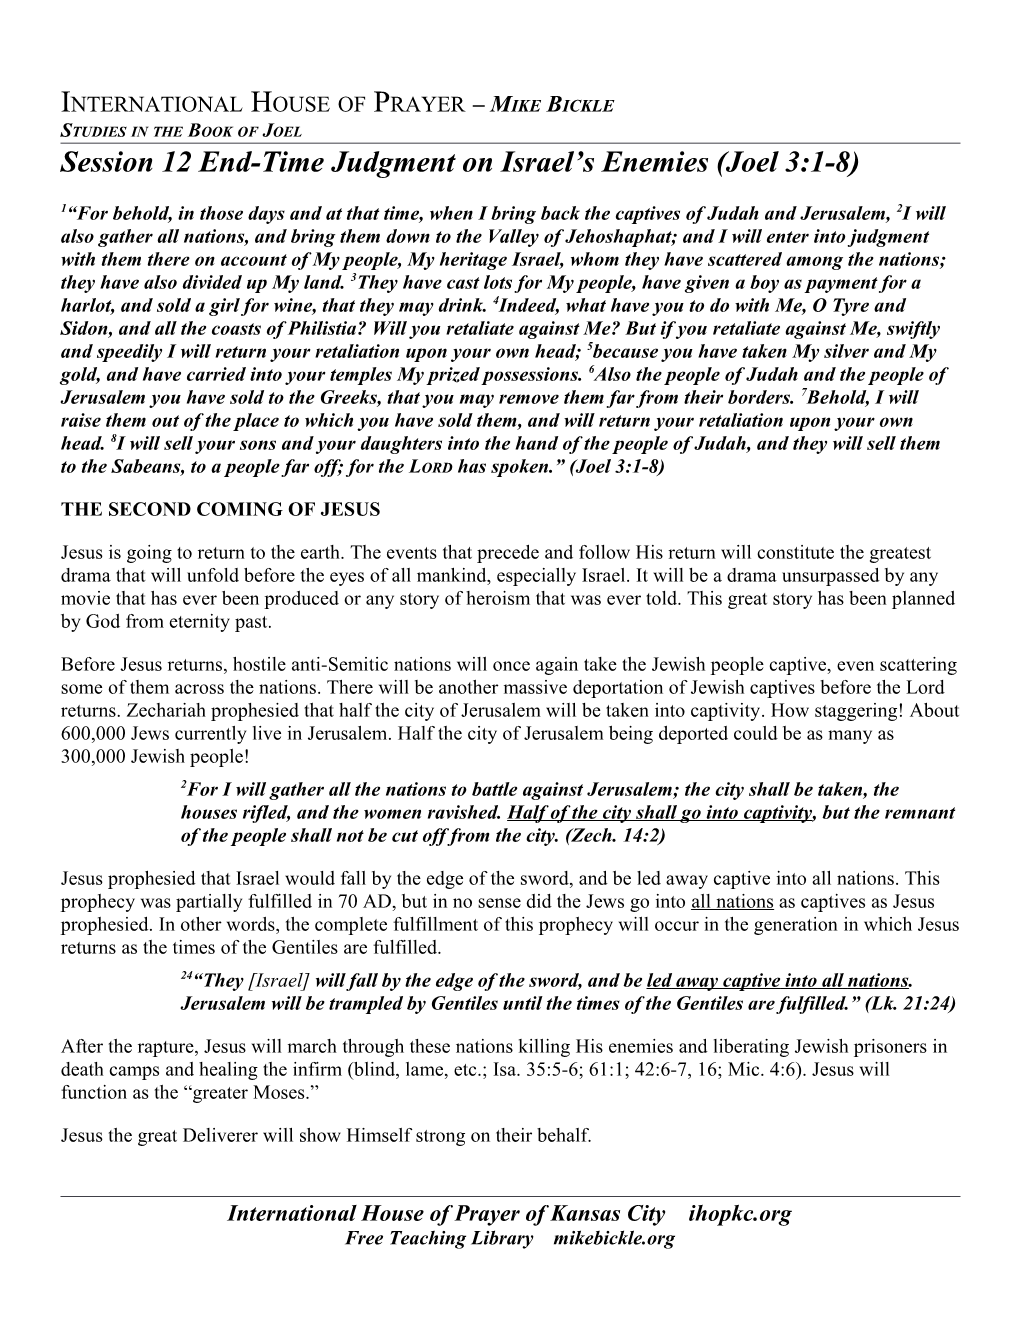 Session 12 End-Time Judgment on Israel S Enemies (Joel 3:1-8) Page 16